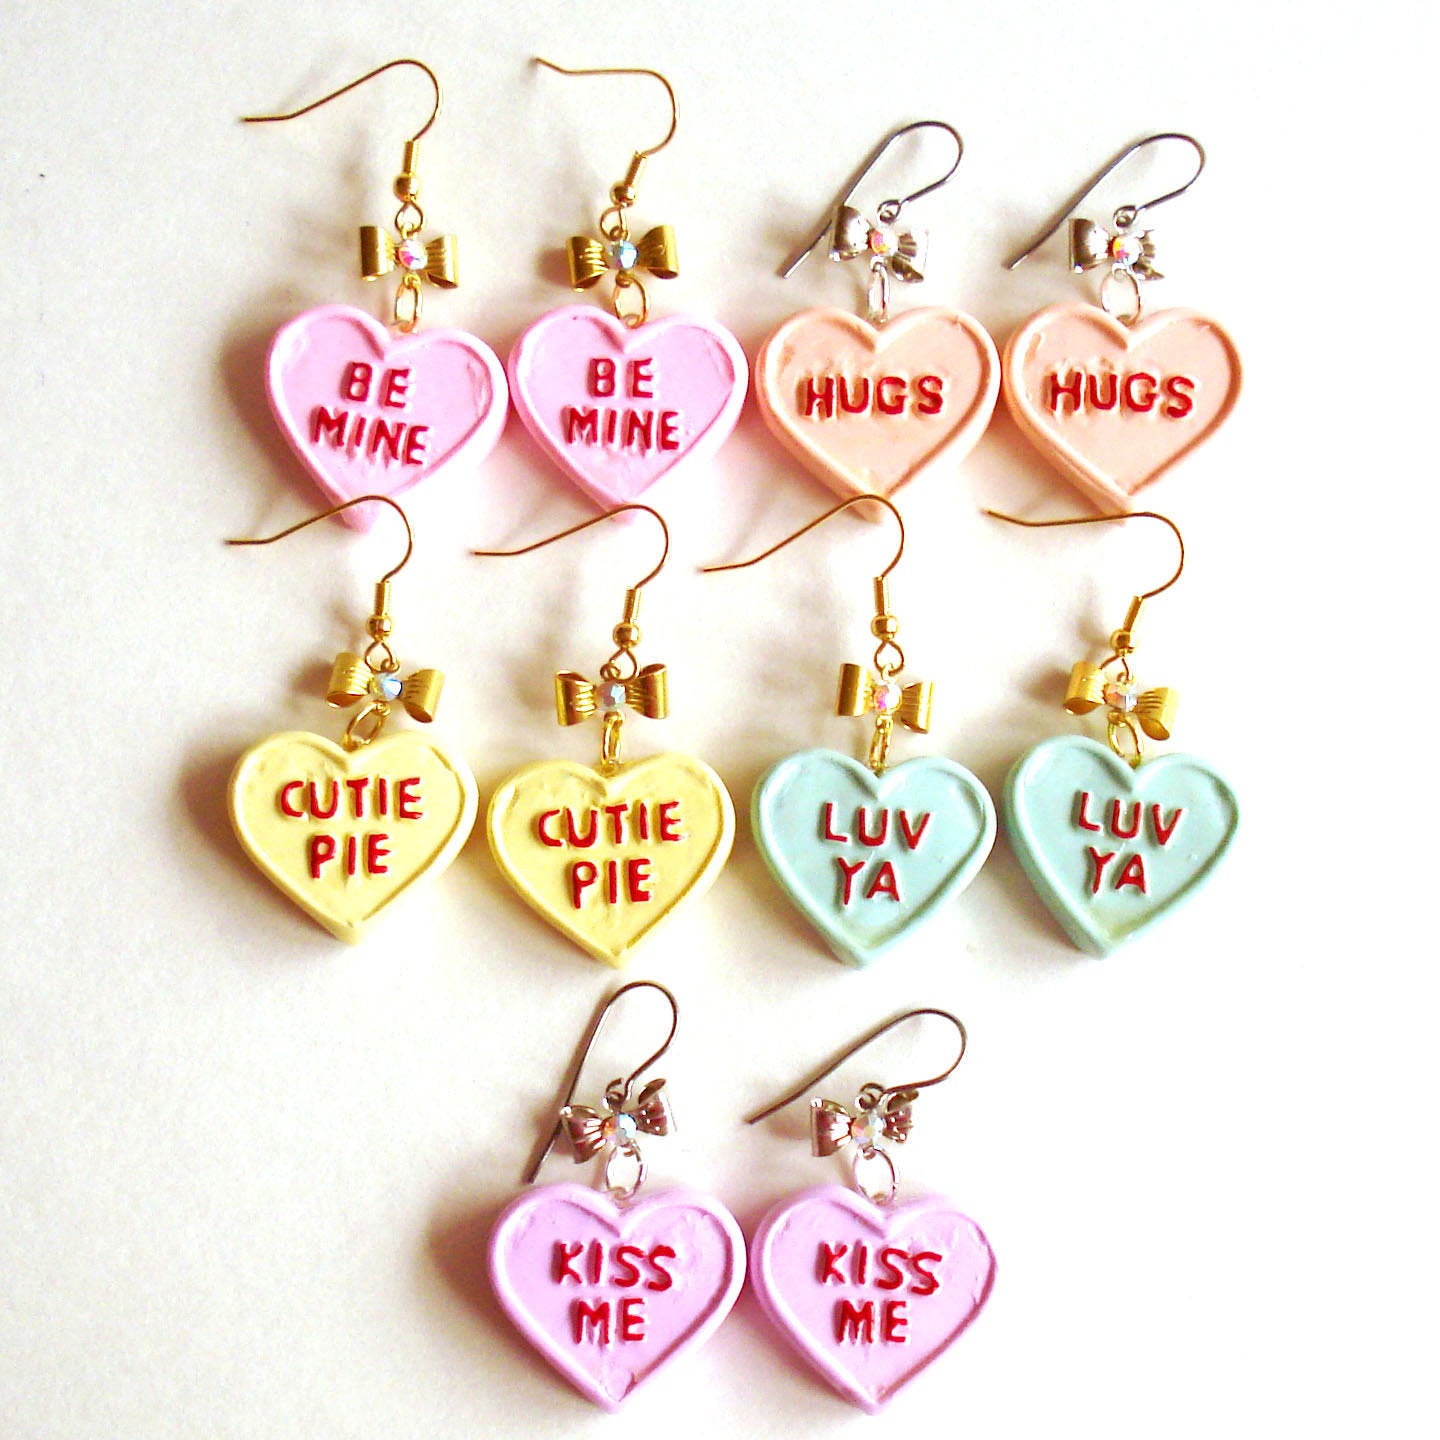 Conversation heart earring stud - Valentines day gift